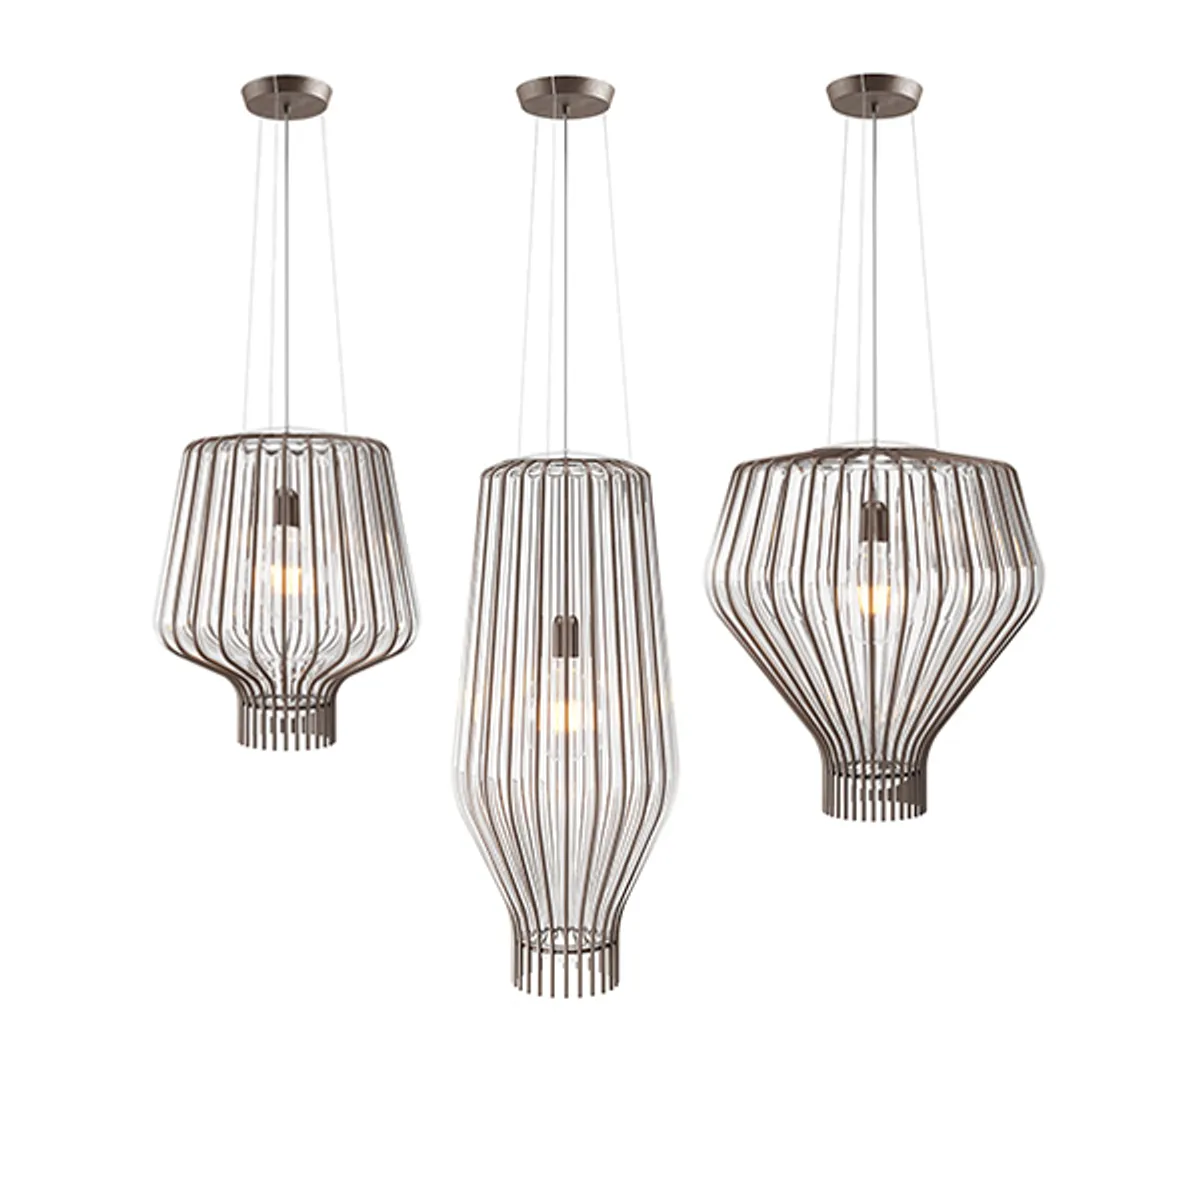 Saya Pendant Lamps Uk Supplier Inside Out Contracts